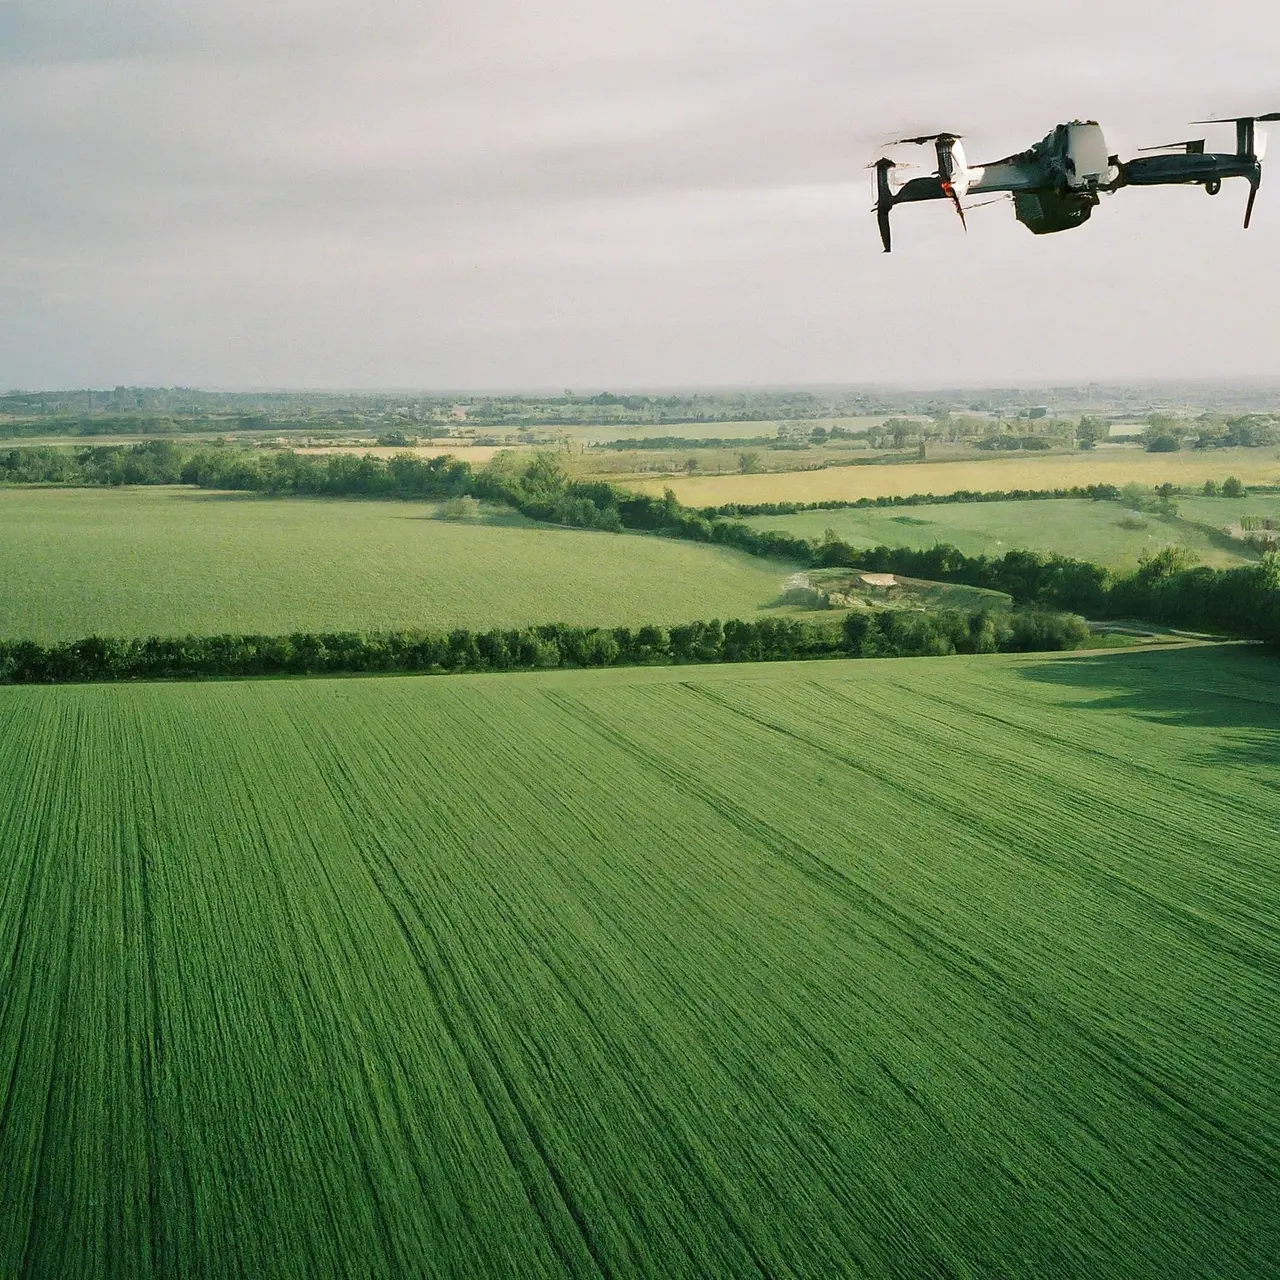 A drone flying over a lush, green farmland. 35mm stock photo